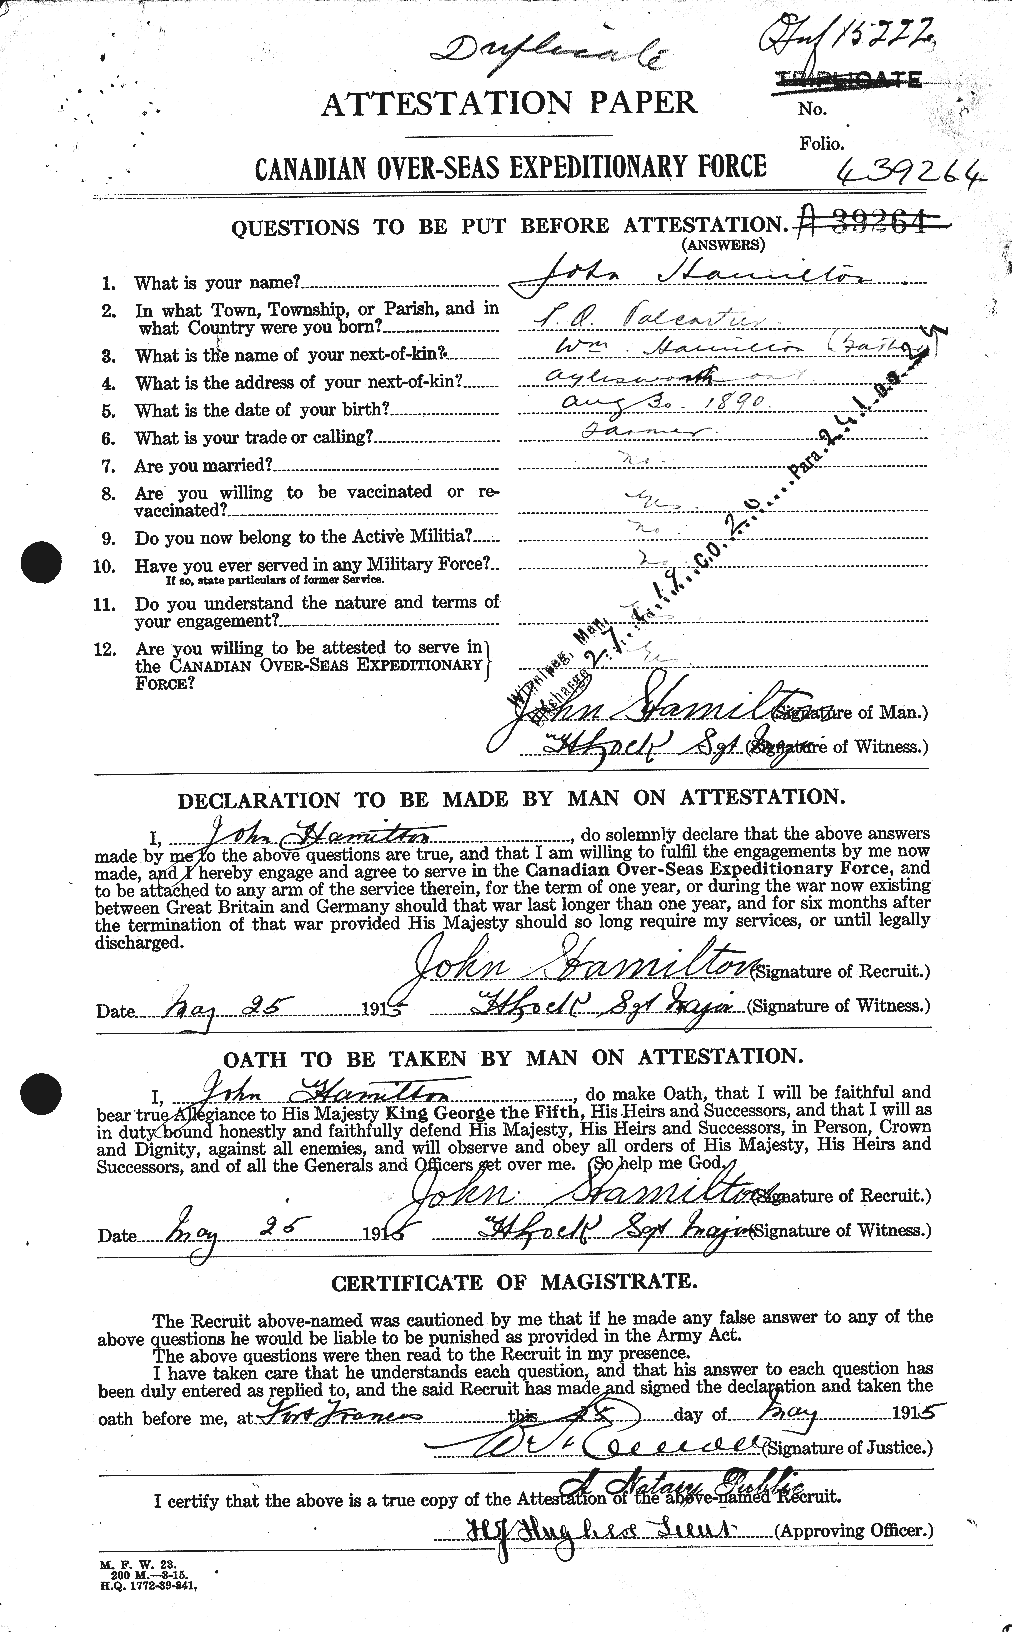 Personnel Records of the First World War - CEF 373044a